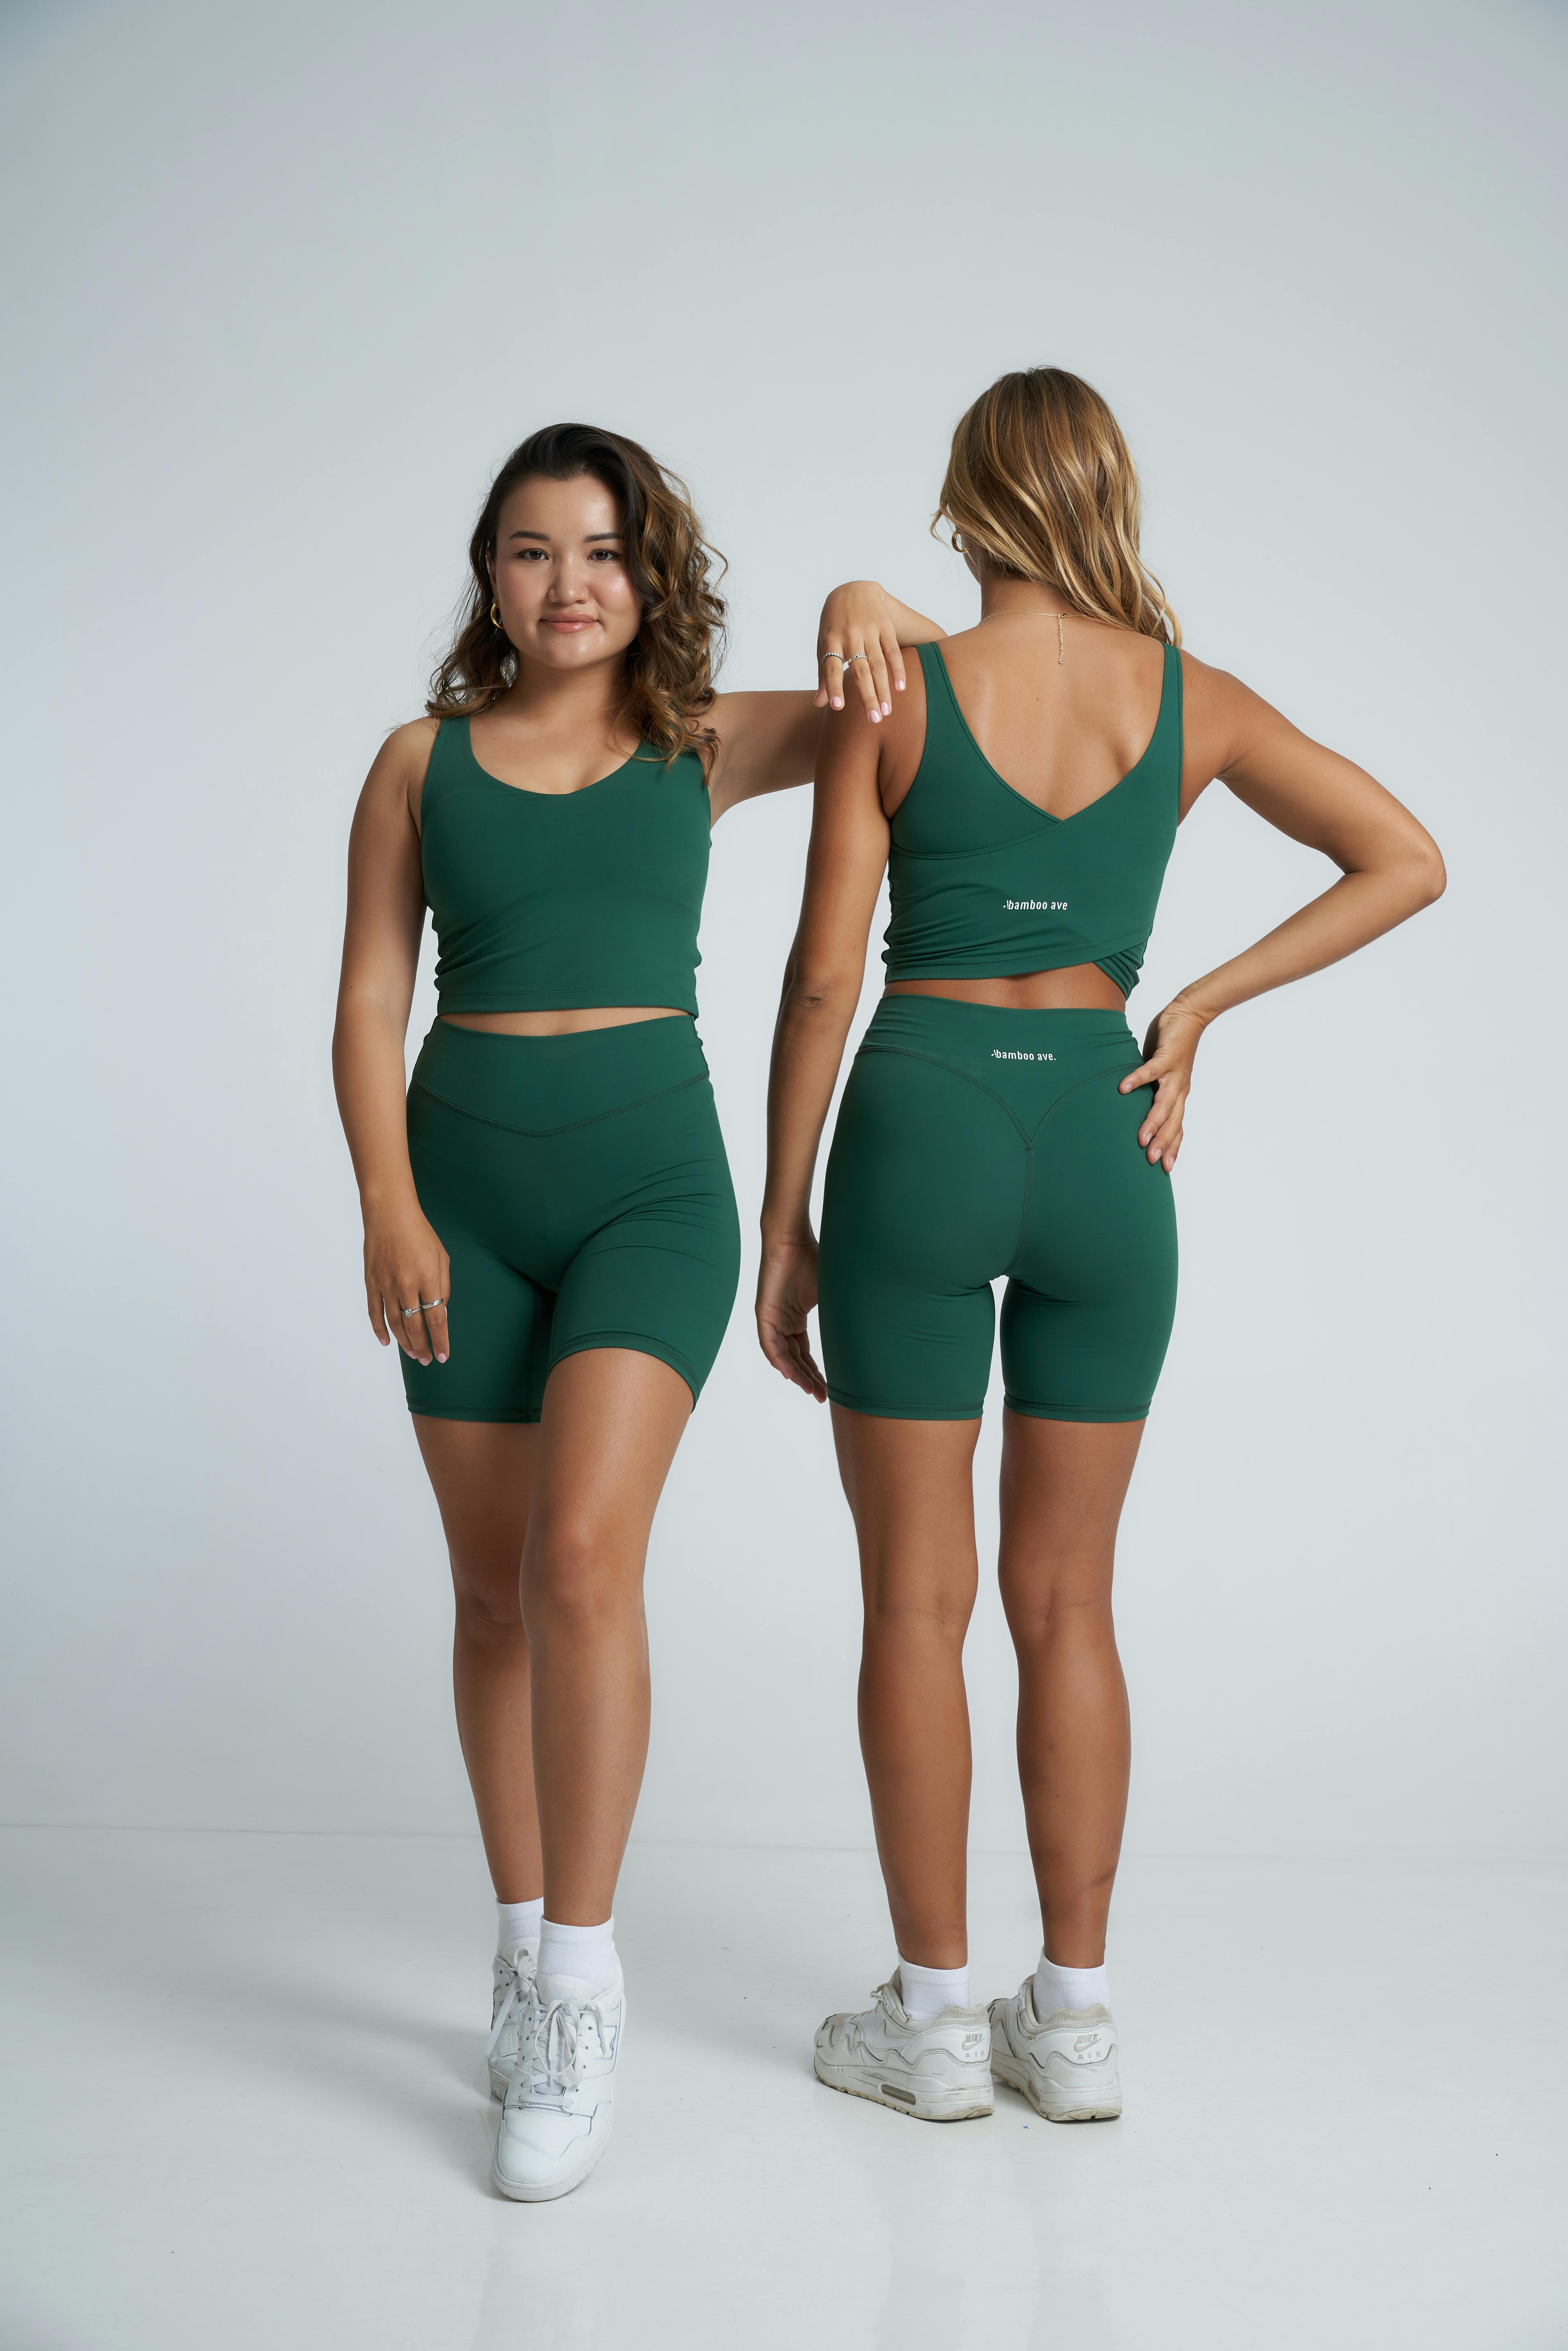 Two women in green sports bras and shorts · Free Stock Photo